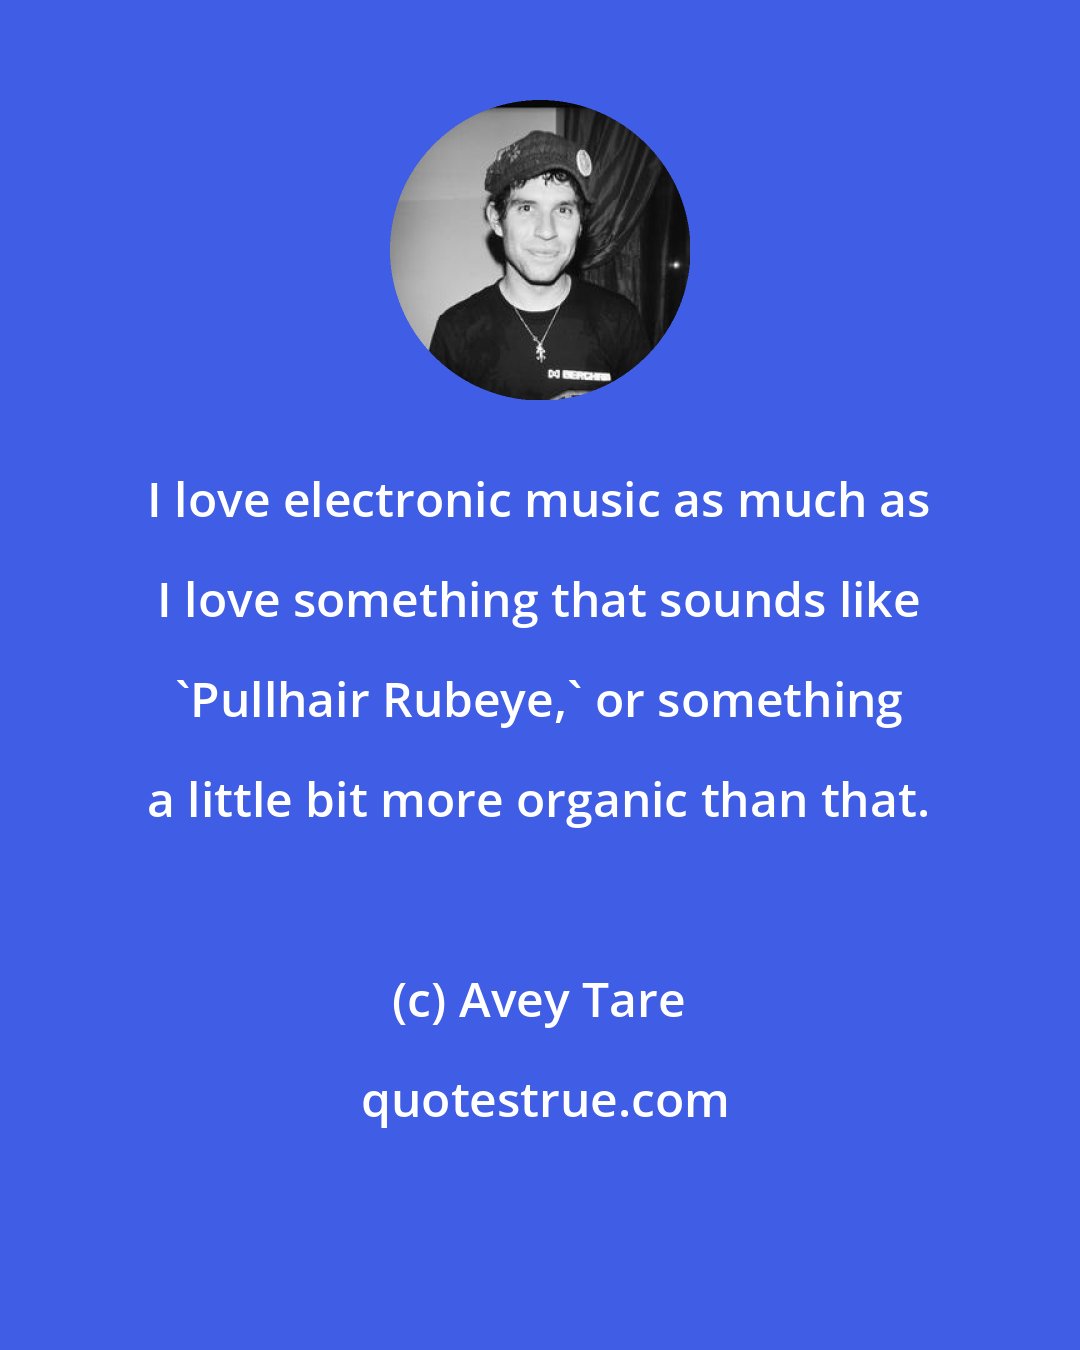 Avey Tare: I love electronic music as much as I love something that sounds like 'Pullhair Rubeye,' or something a little bit more organic than that.